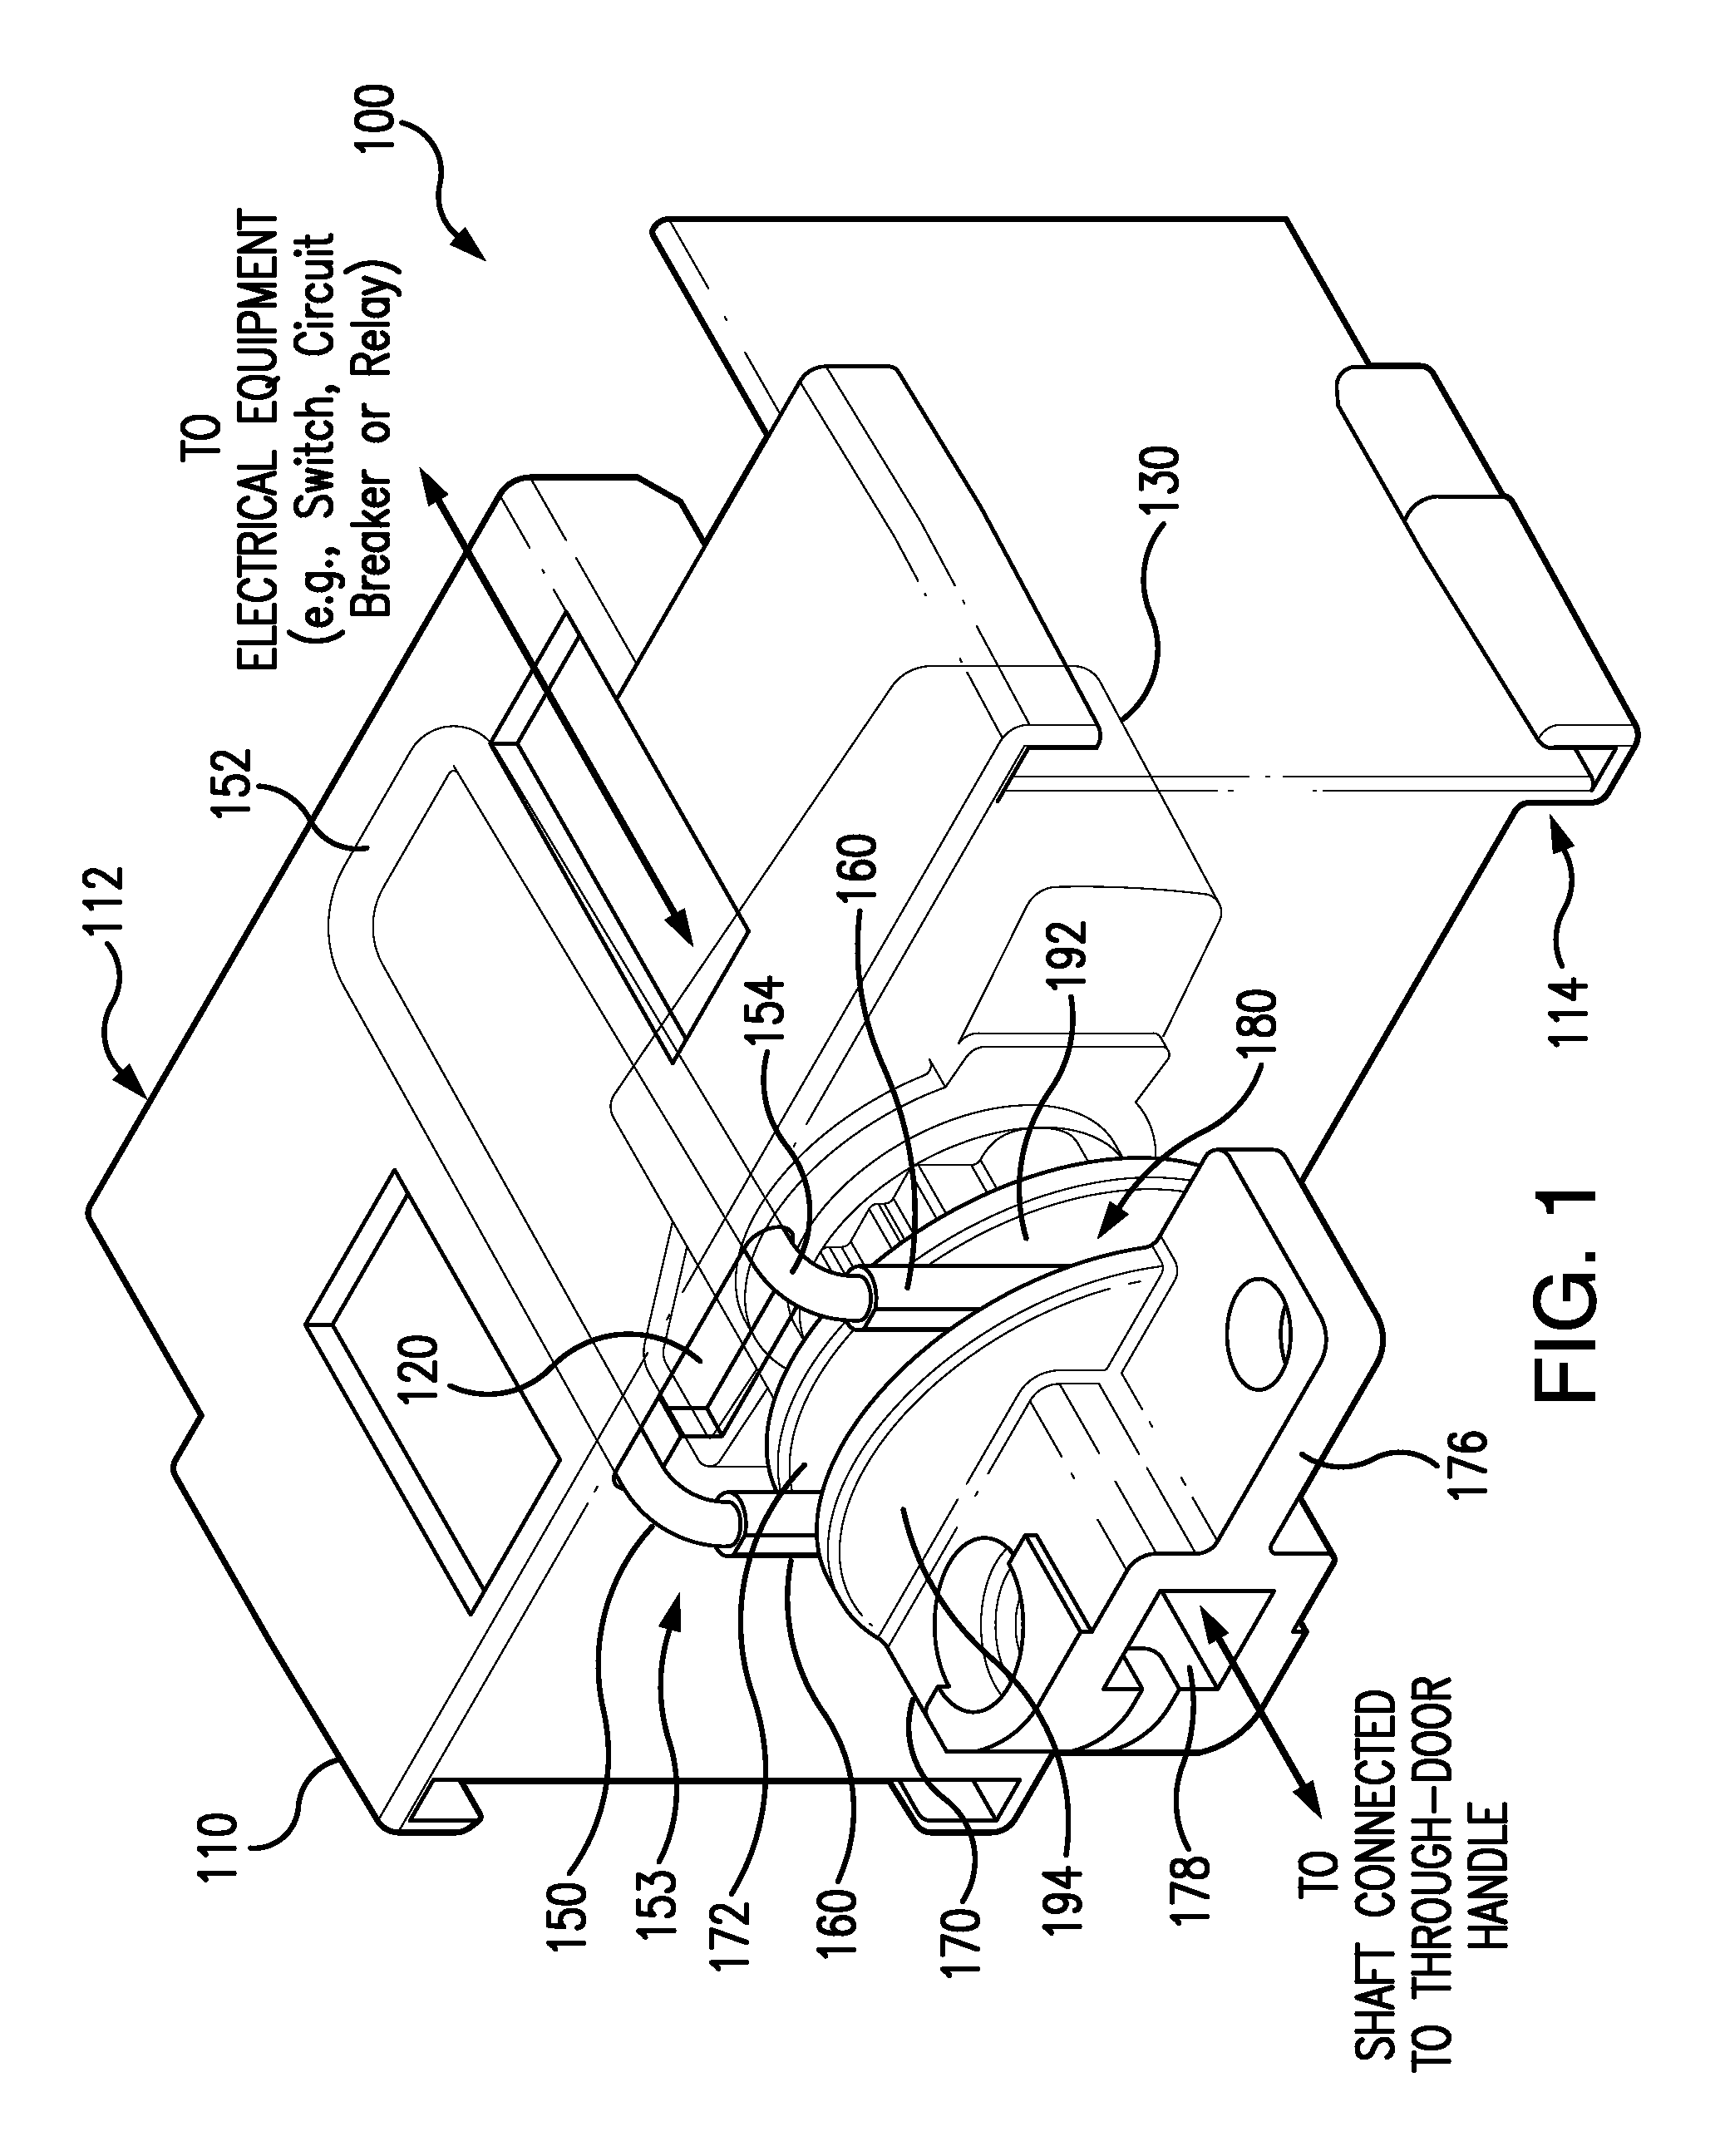 Over-center handle mechanism for increased tactile feedback on a rotary actuator